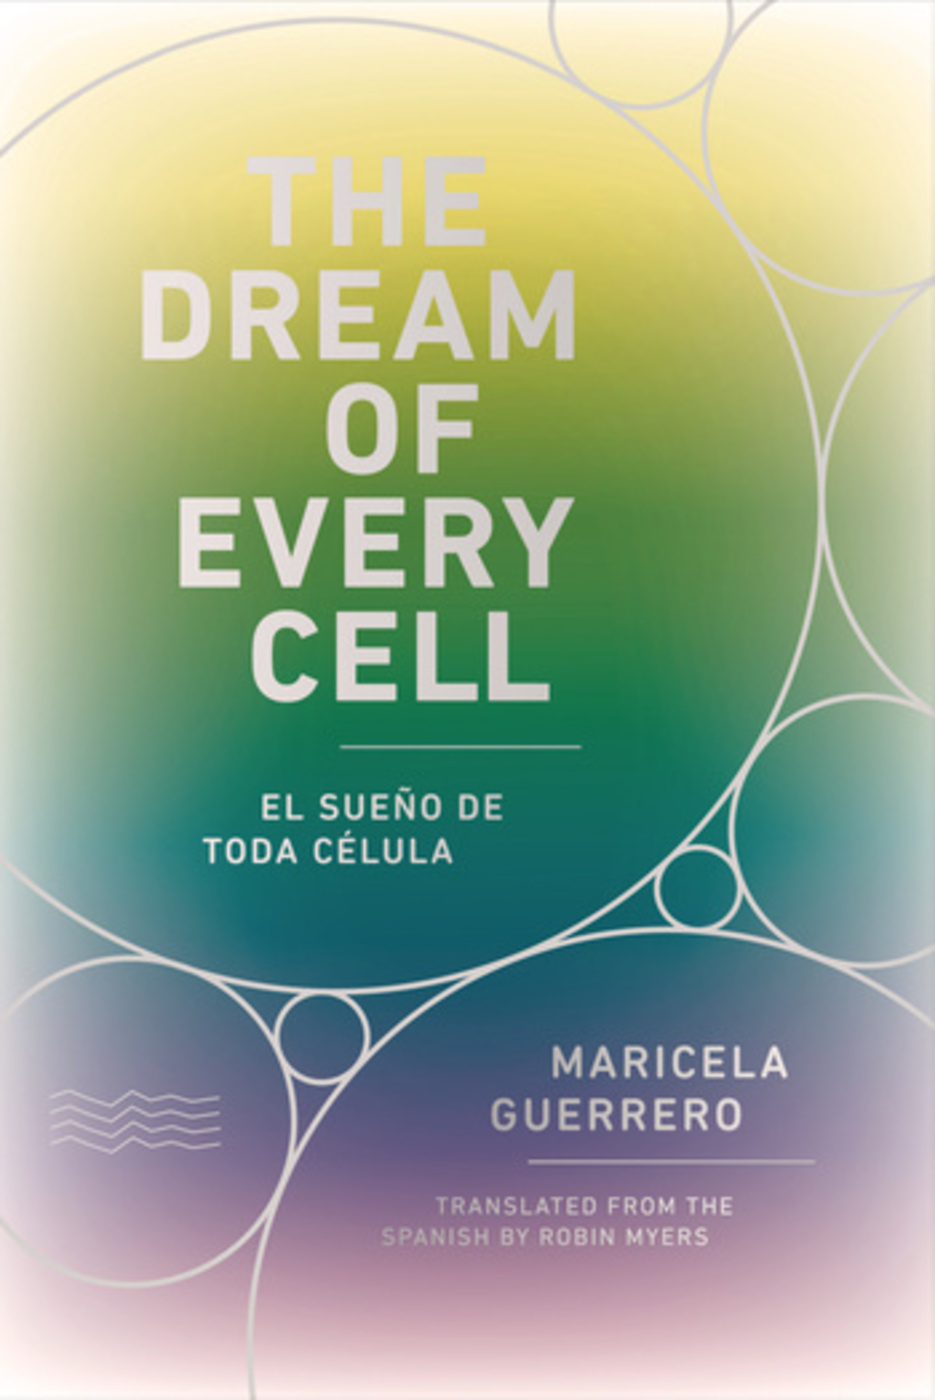 The dream of every cell  maricela guerrero